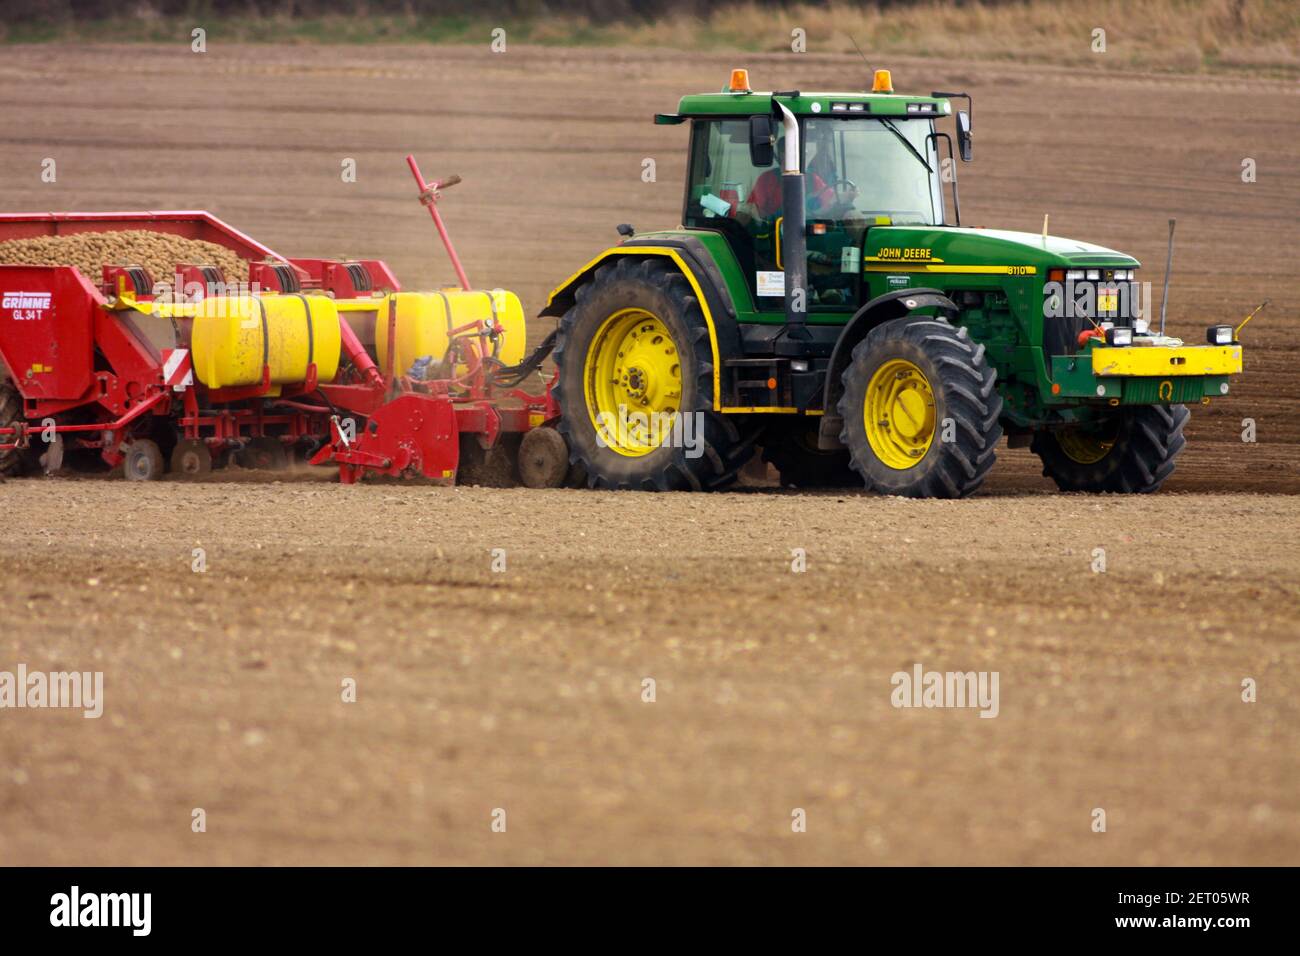 John Deere tractor potato planter sowing new crop into spring fine soil, farming machinery Stock Photo